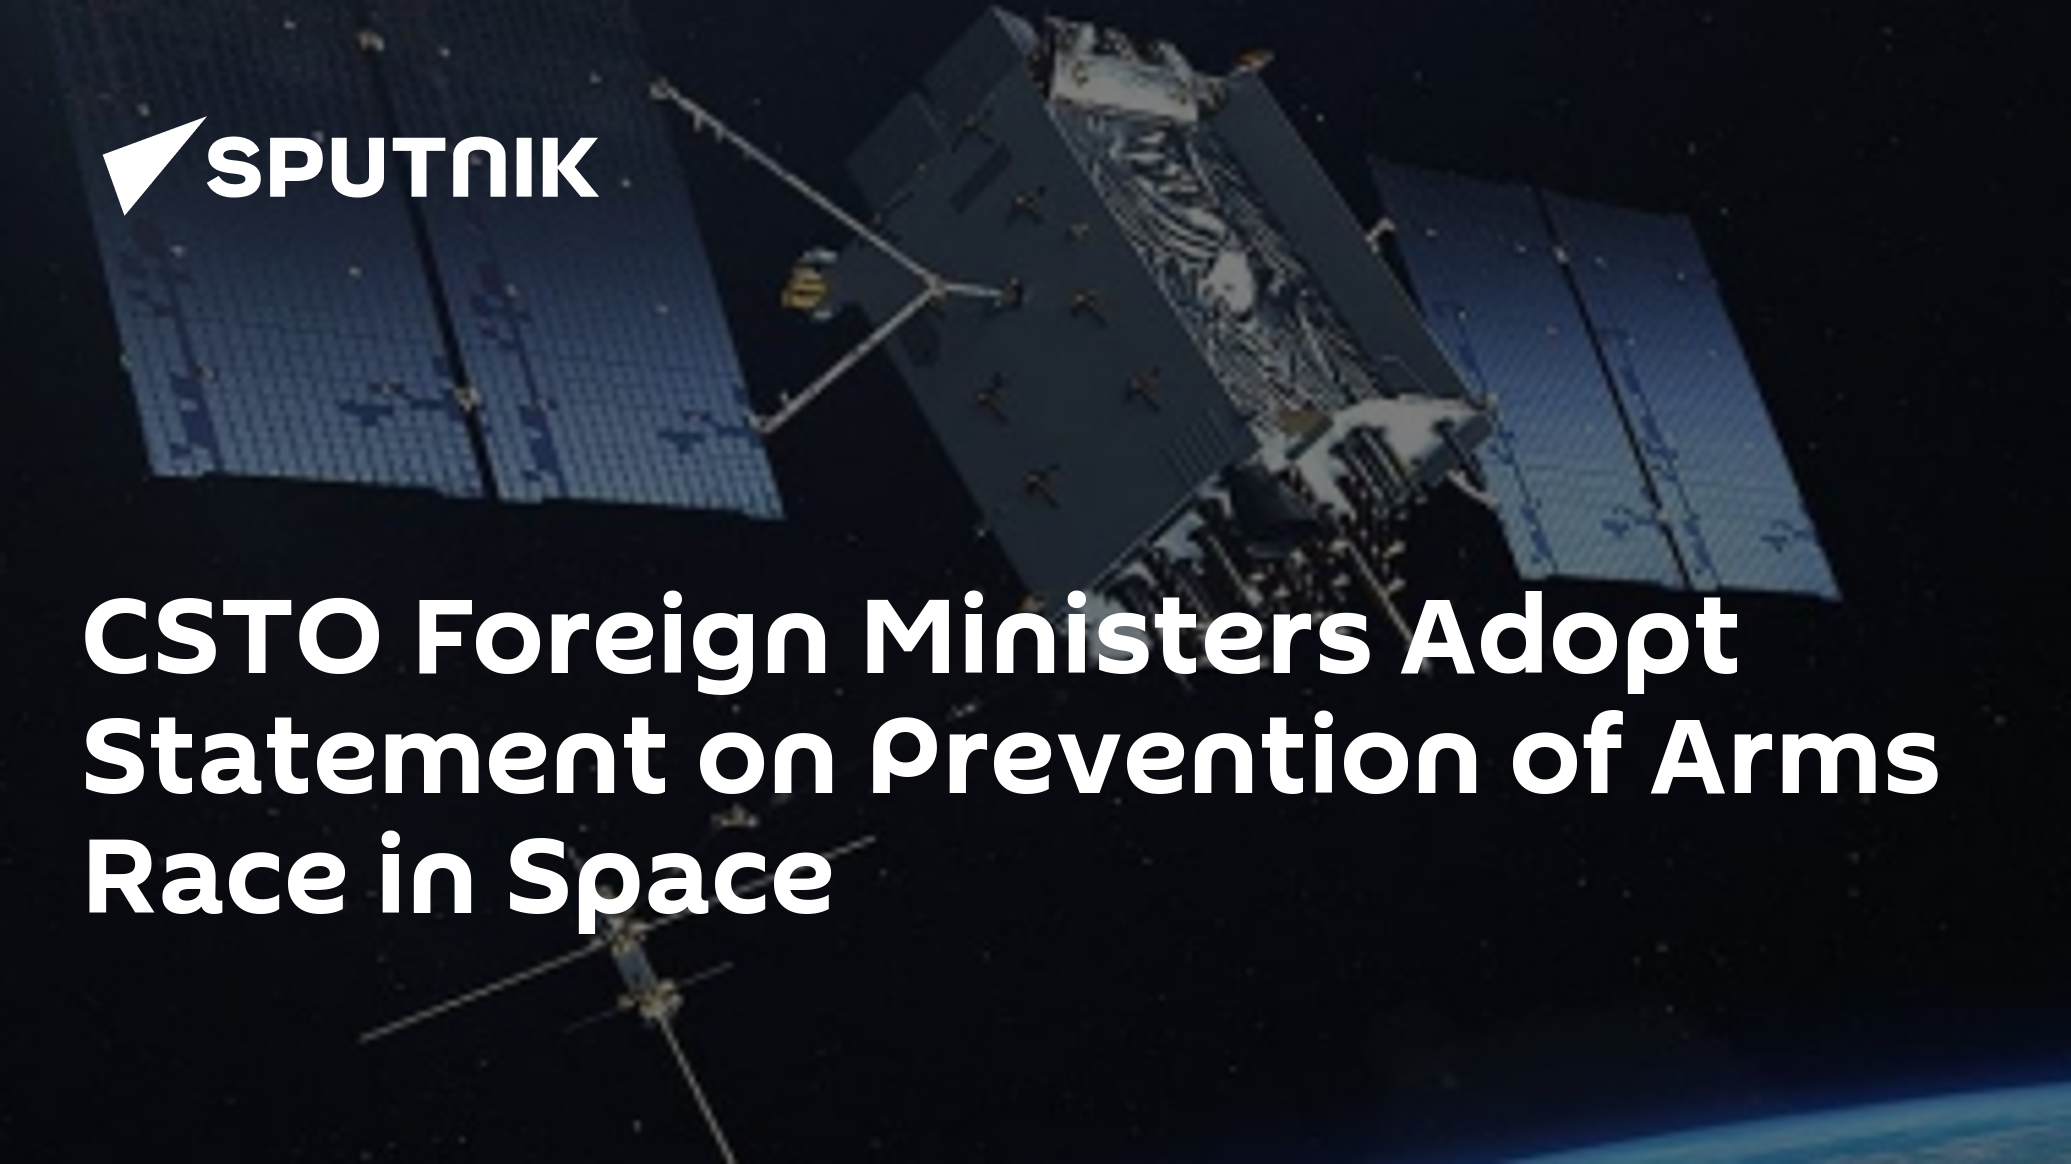 CSTO Foreign Ministers Adopt Statement on Prevention of Arms Race in Space